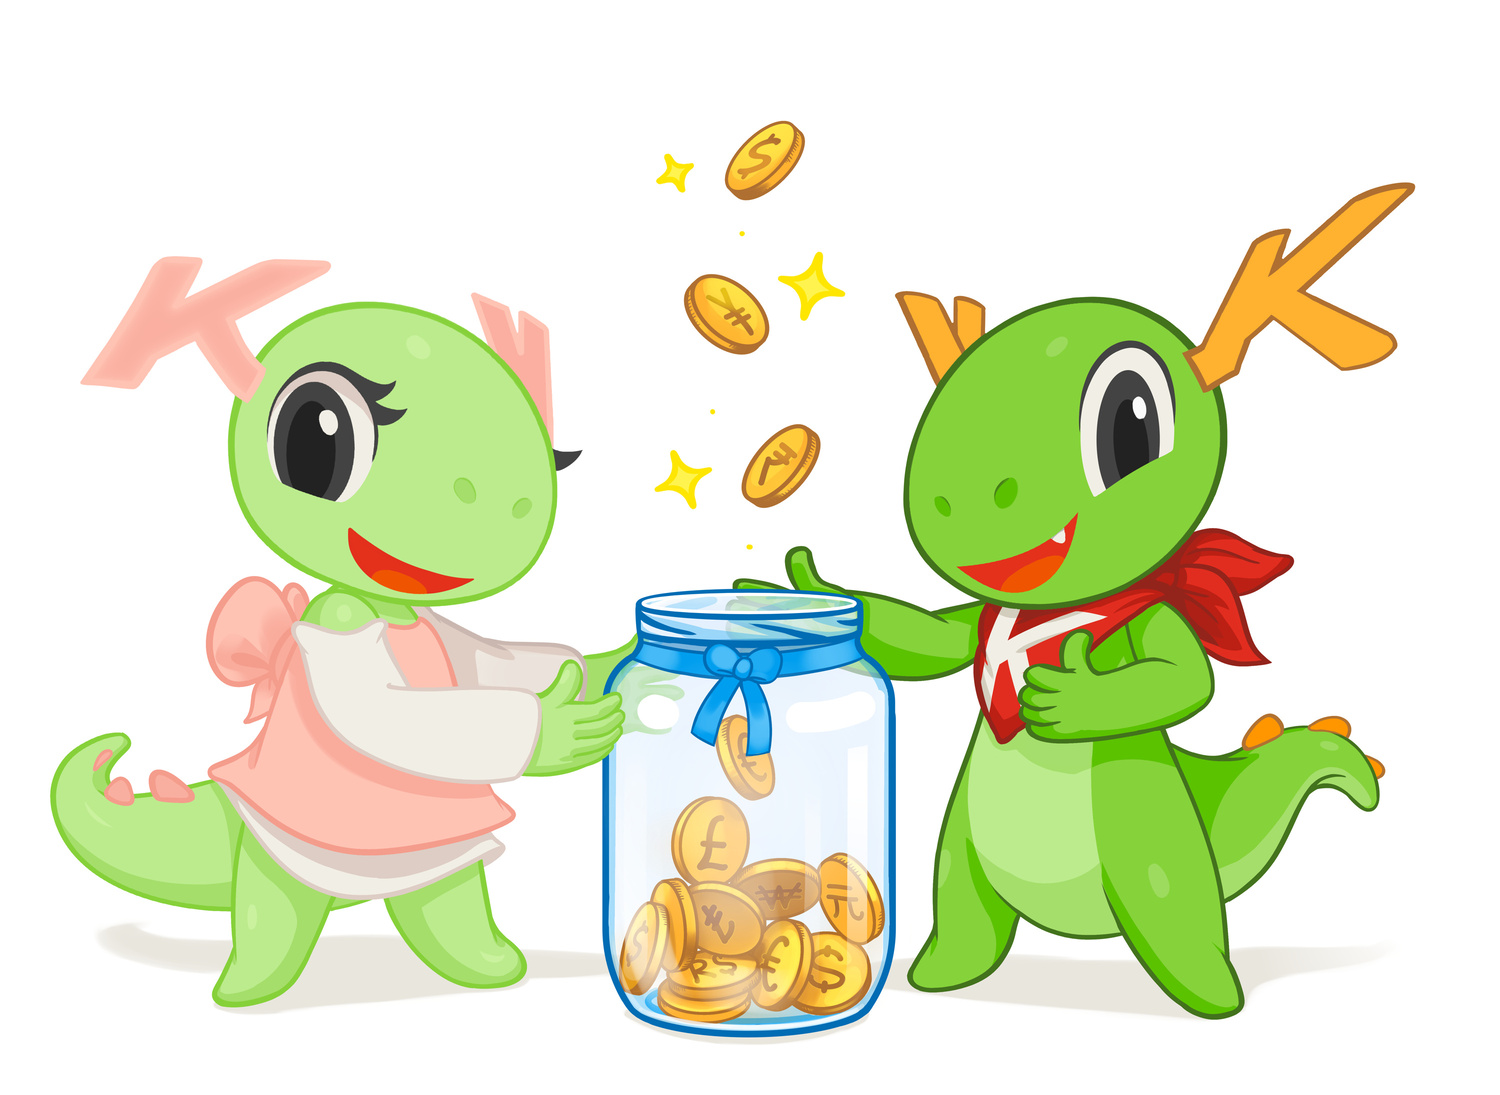 Konqi, the KDE mascot, and Katie, his girlfriend, standing next to a jar where golden coins are being thrown into